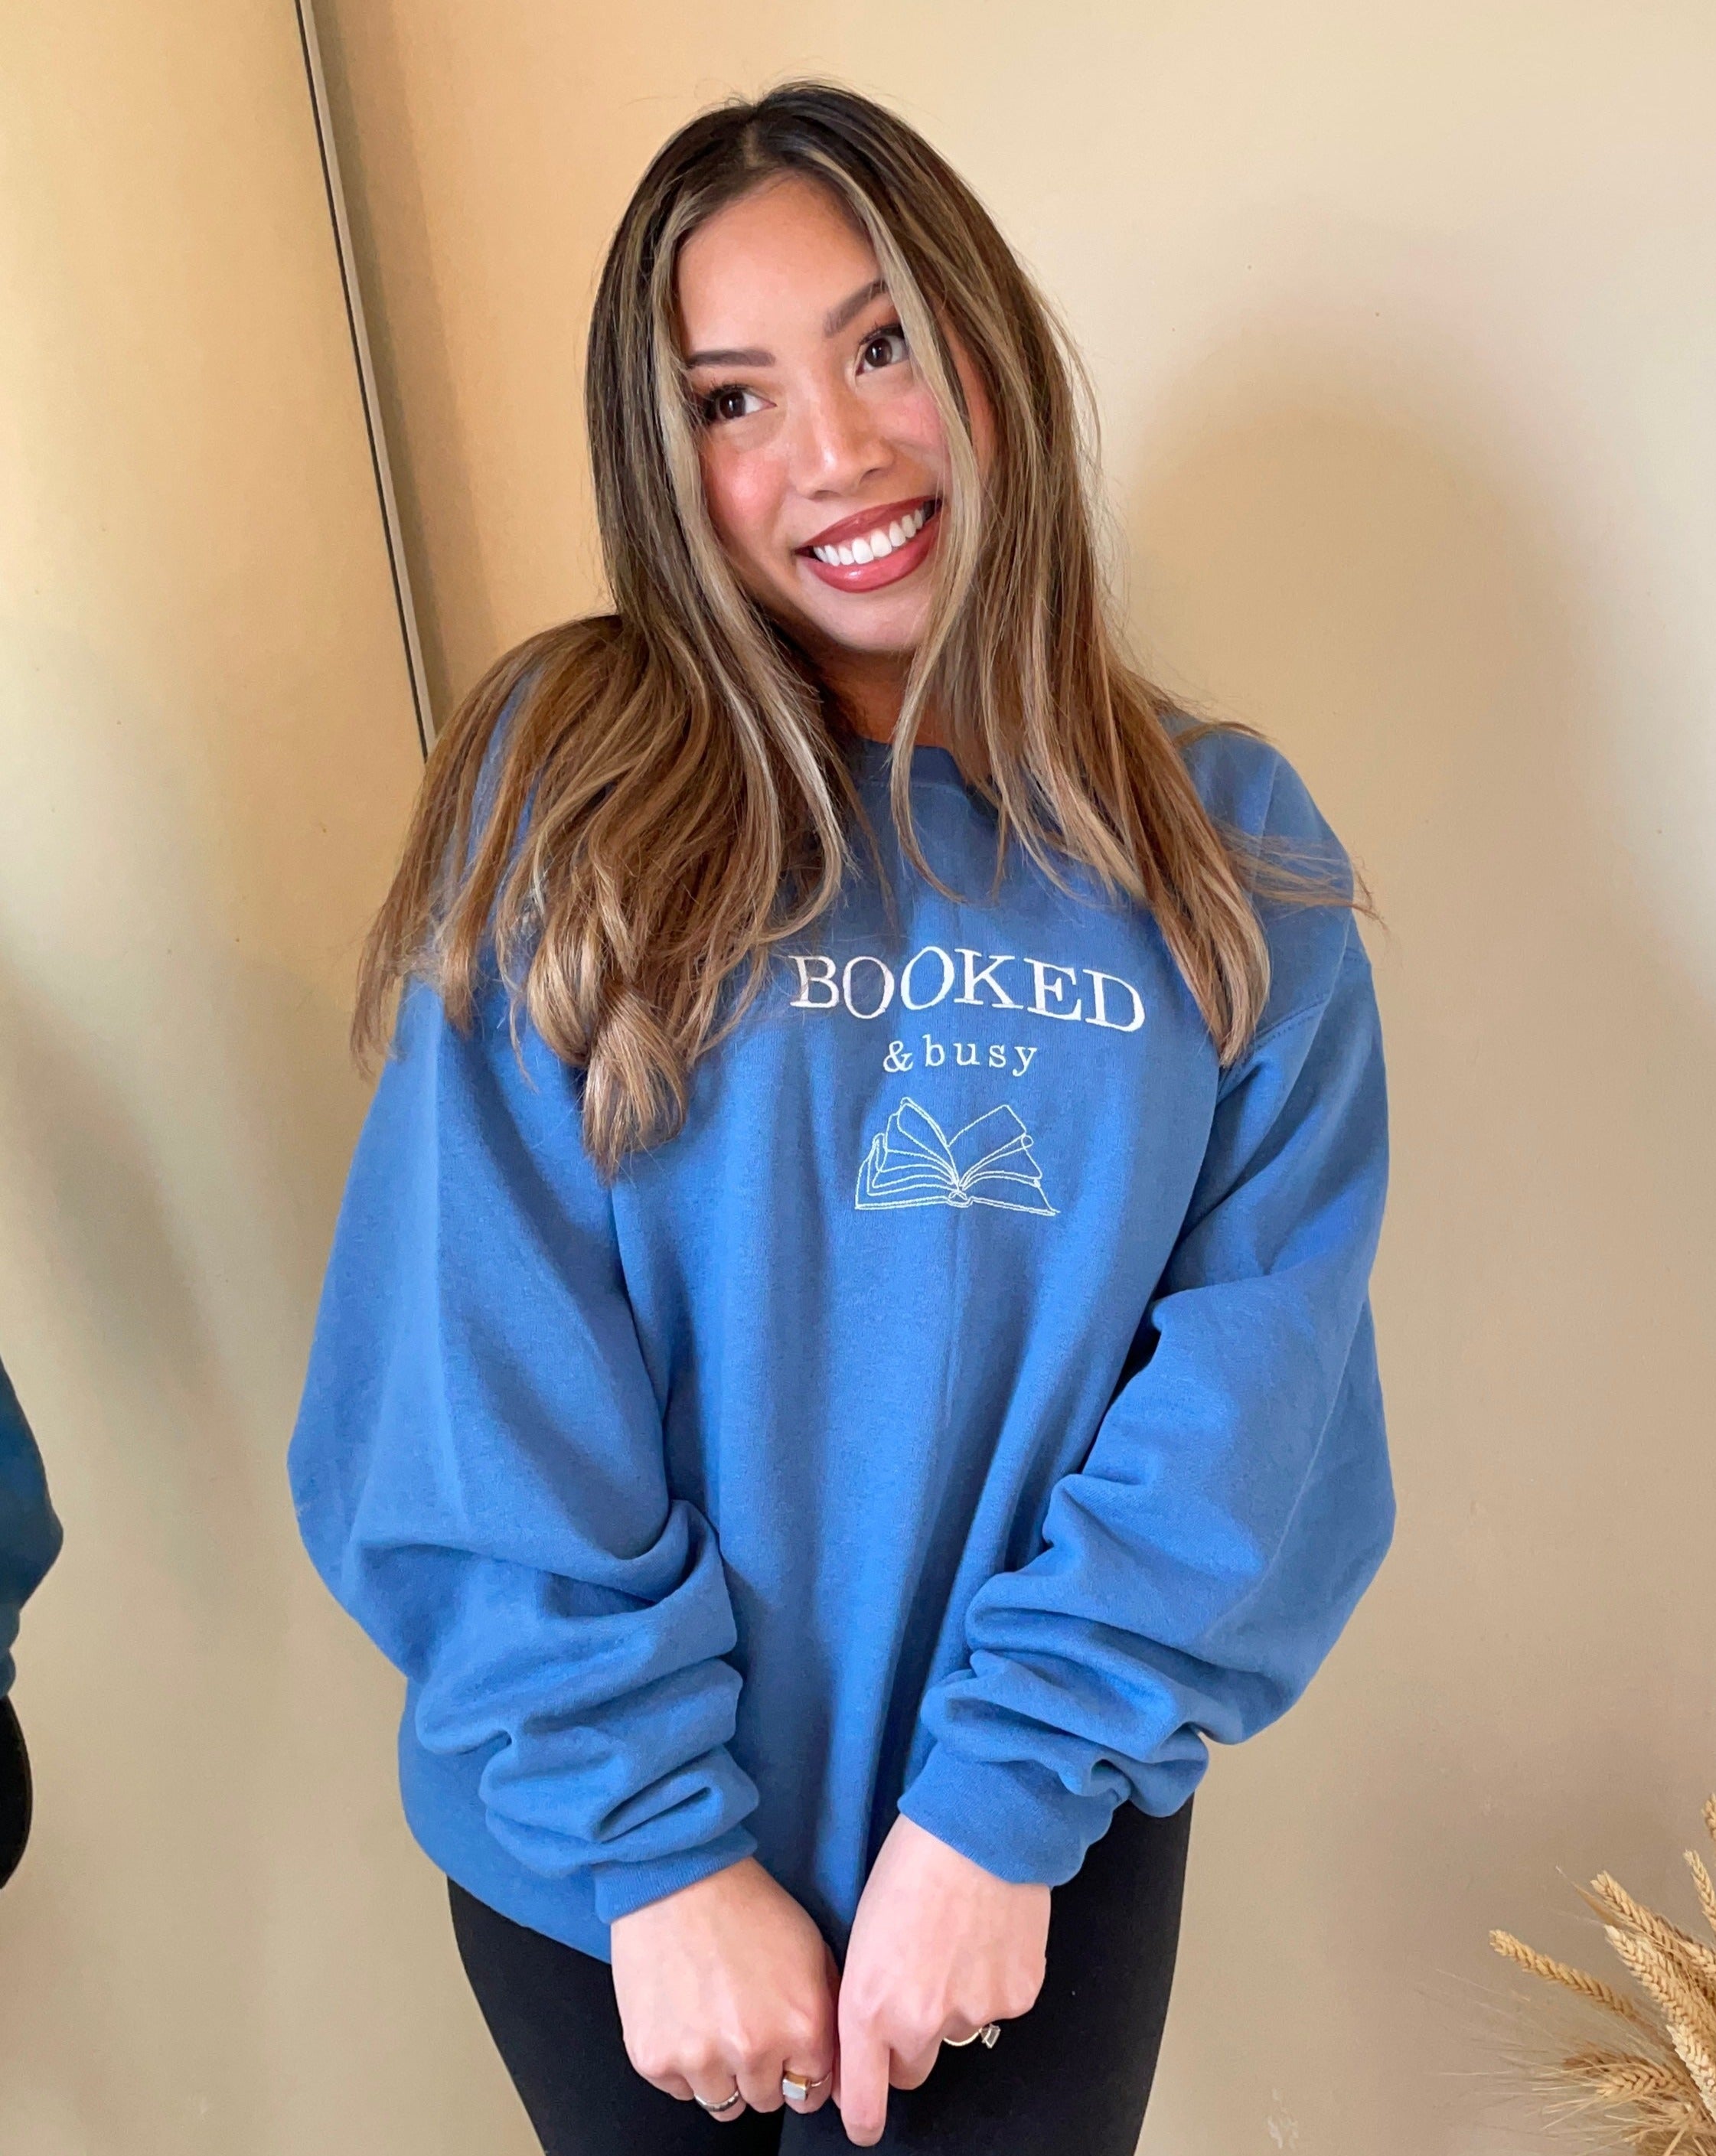 Booked & Busy Sweatshirt - Blue